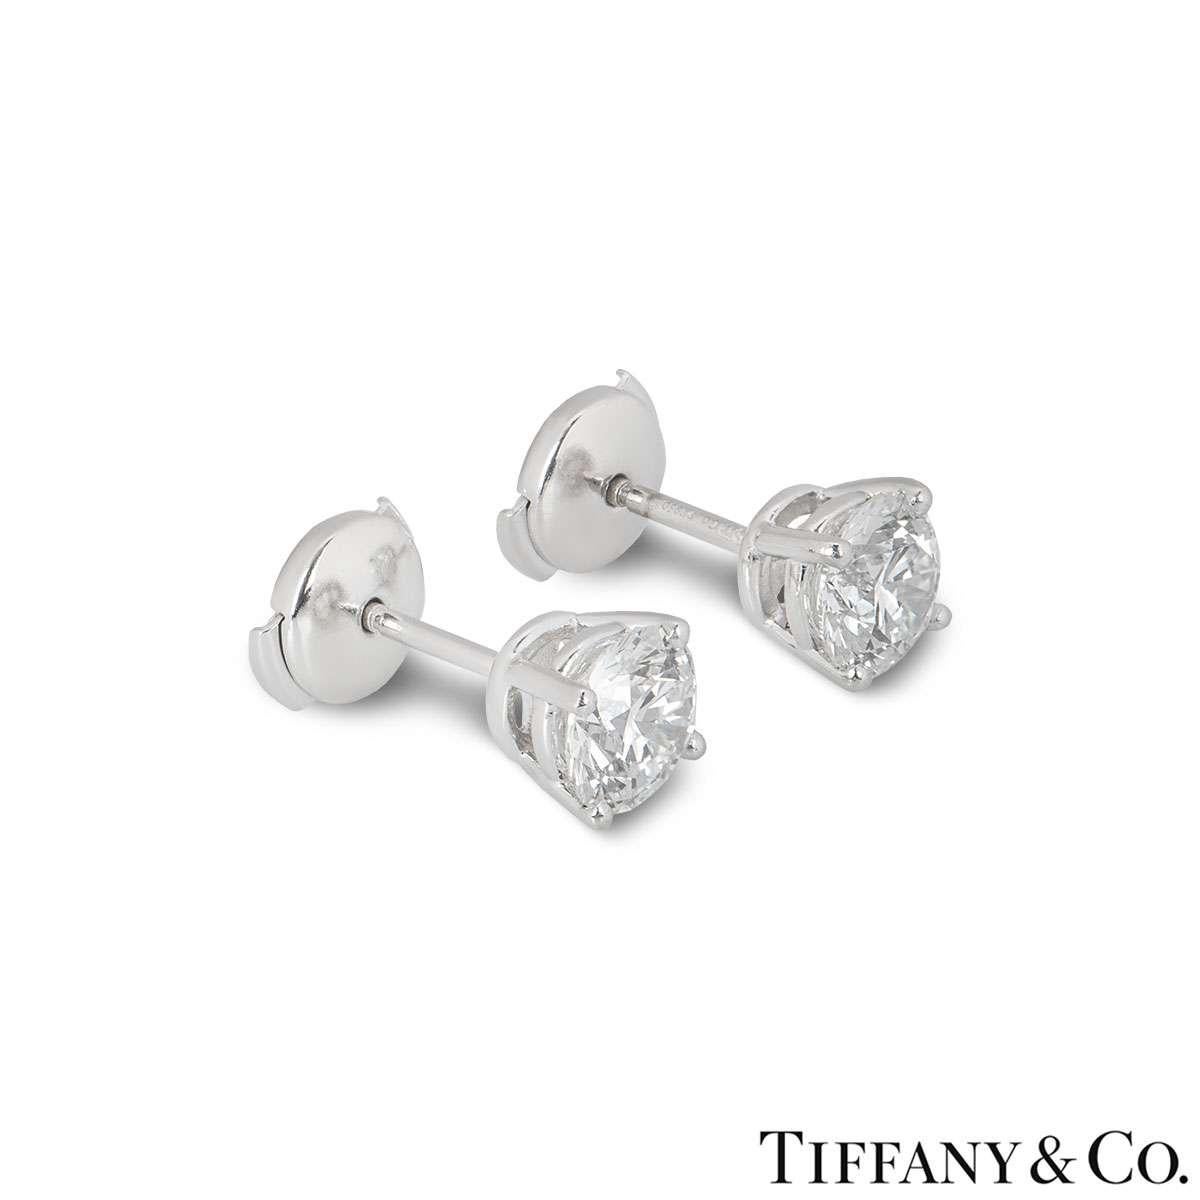 A pair of diamond stud earrings by Tiffany & Co. The earrings each feature a single round brilliant cut diamond in a 4 claw setting weighing 1.21ct and 1.22ct. The diamonds are both G colour and VS1 clarity. The earrings have post and alpha back